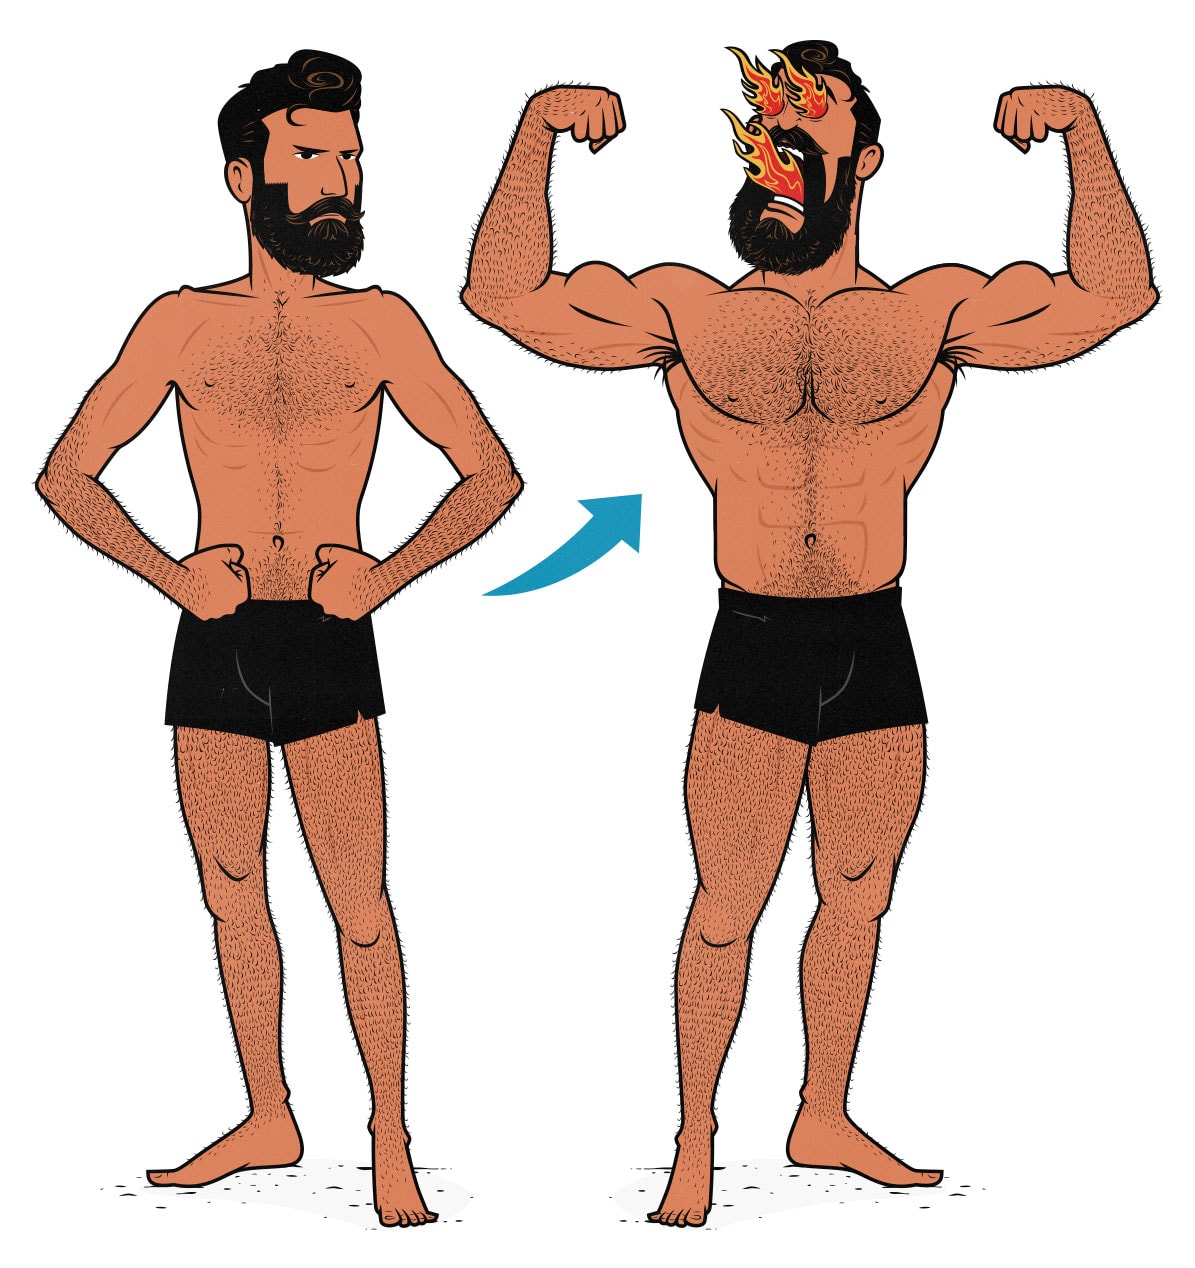 Cartoon illustration of a skinny guy building muscle and bulking up.